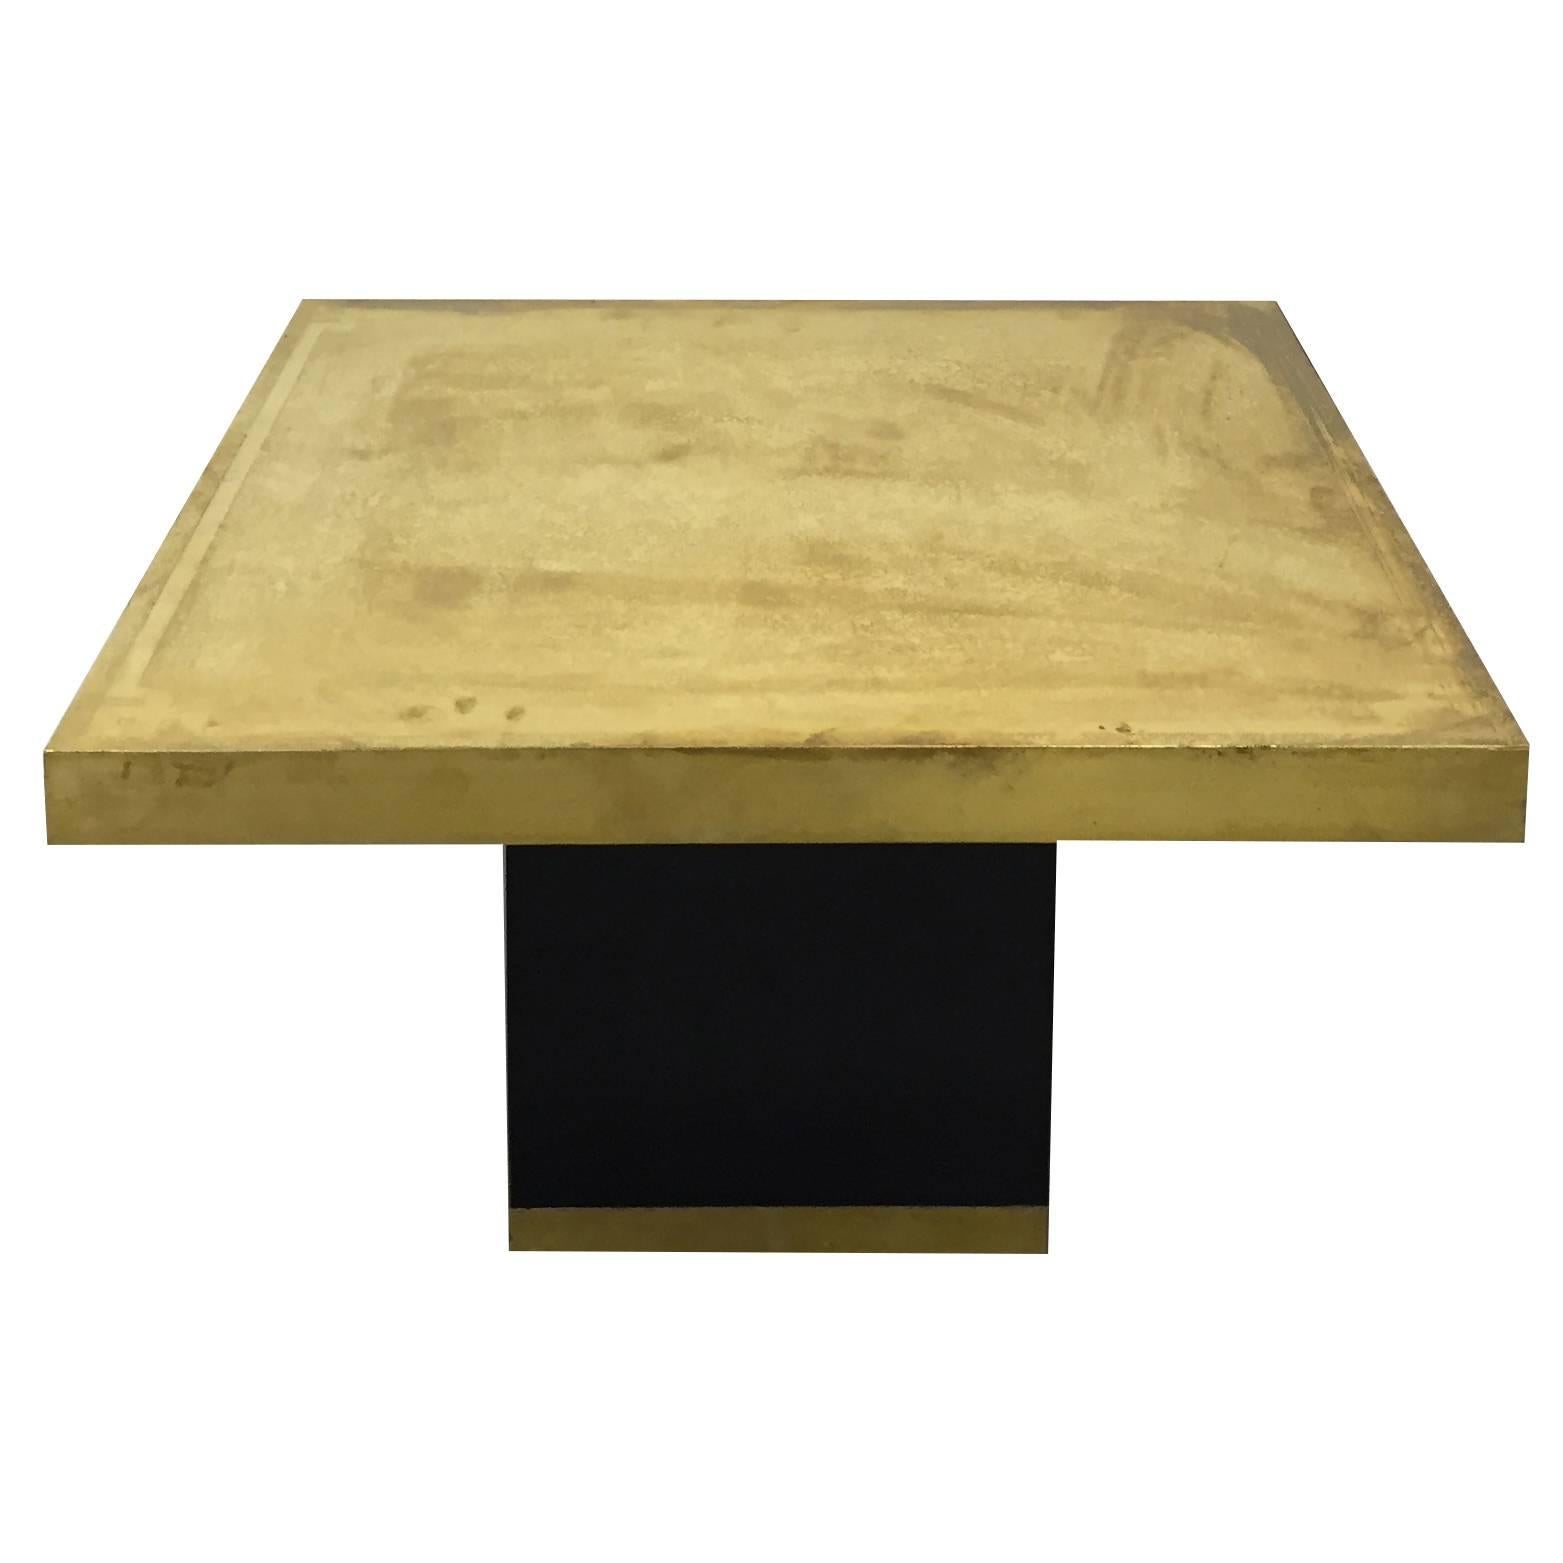 Etched Brass Top Square Side Table with Chinese Border Design For Sale